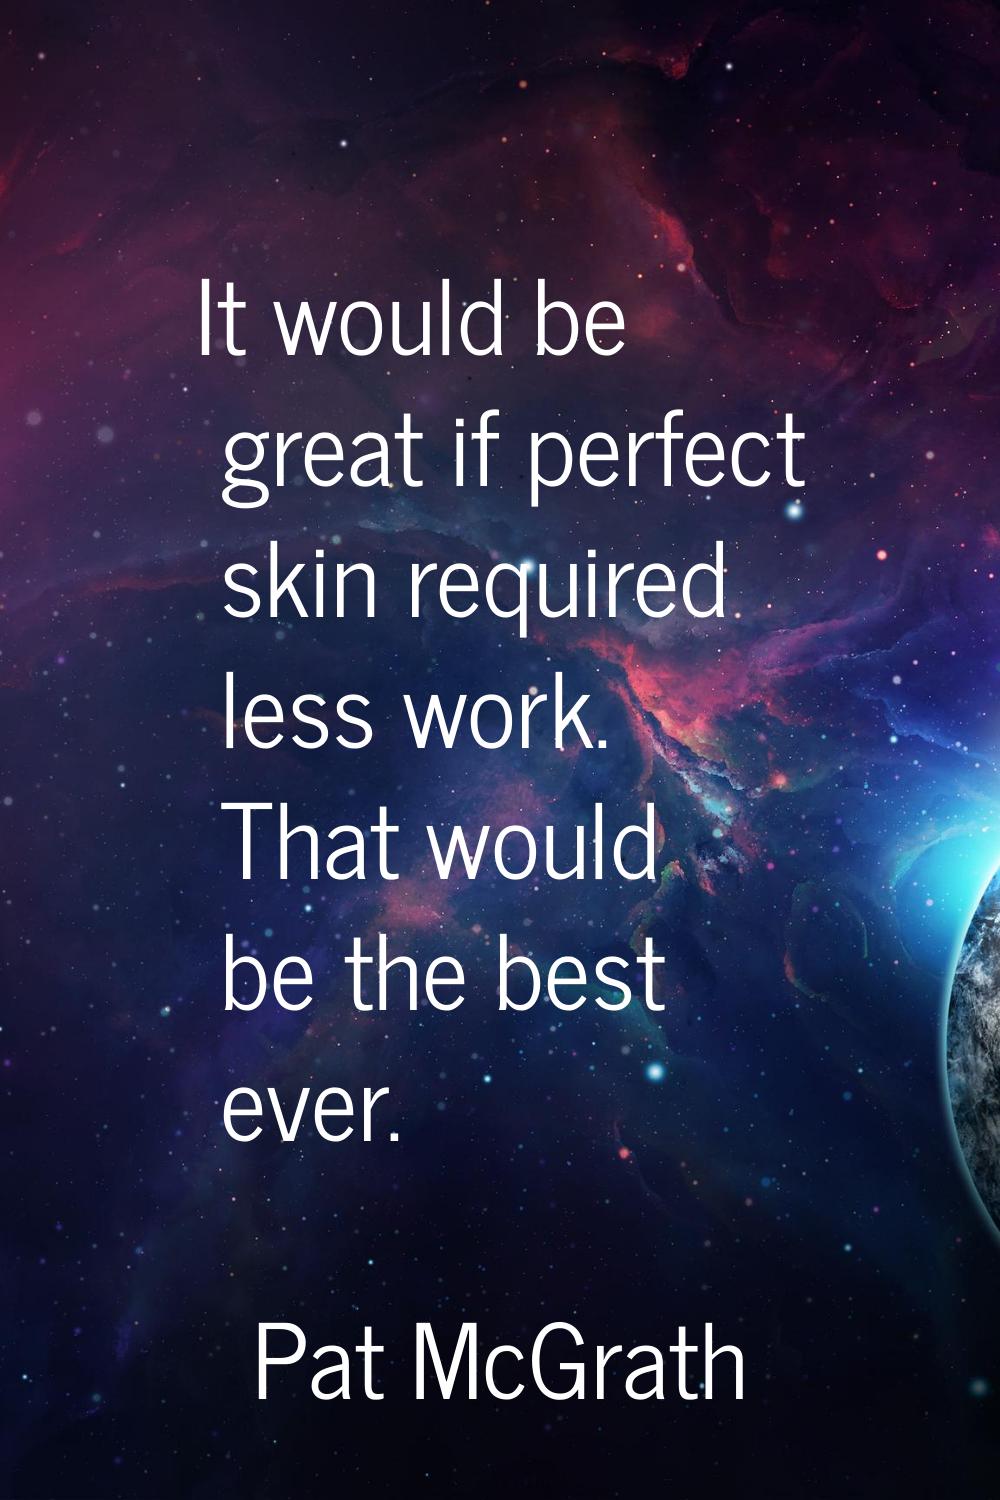 It would be great if perfect skin required less work. That would be the best ever.